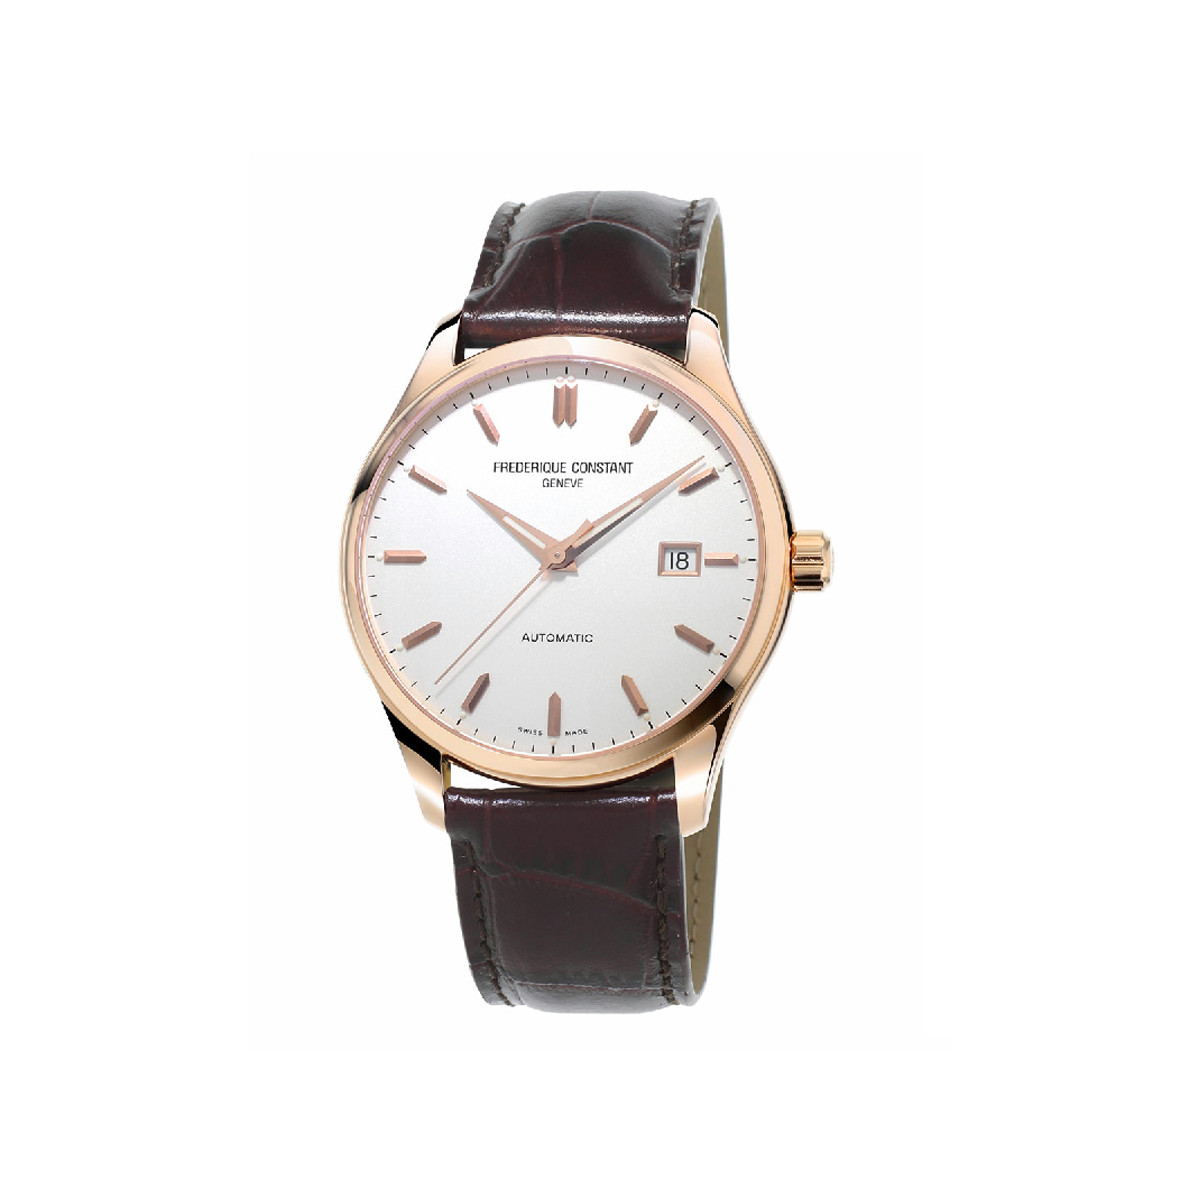 FREDERIQUE CONSTANT NEW INDEX AUTOMATIC GOLD PLATED